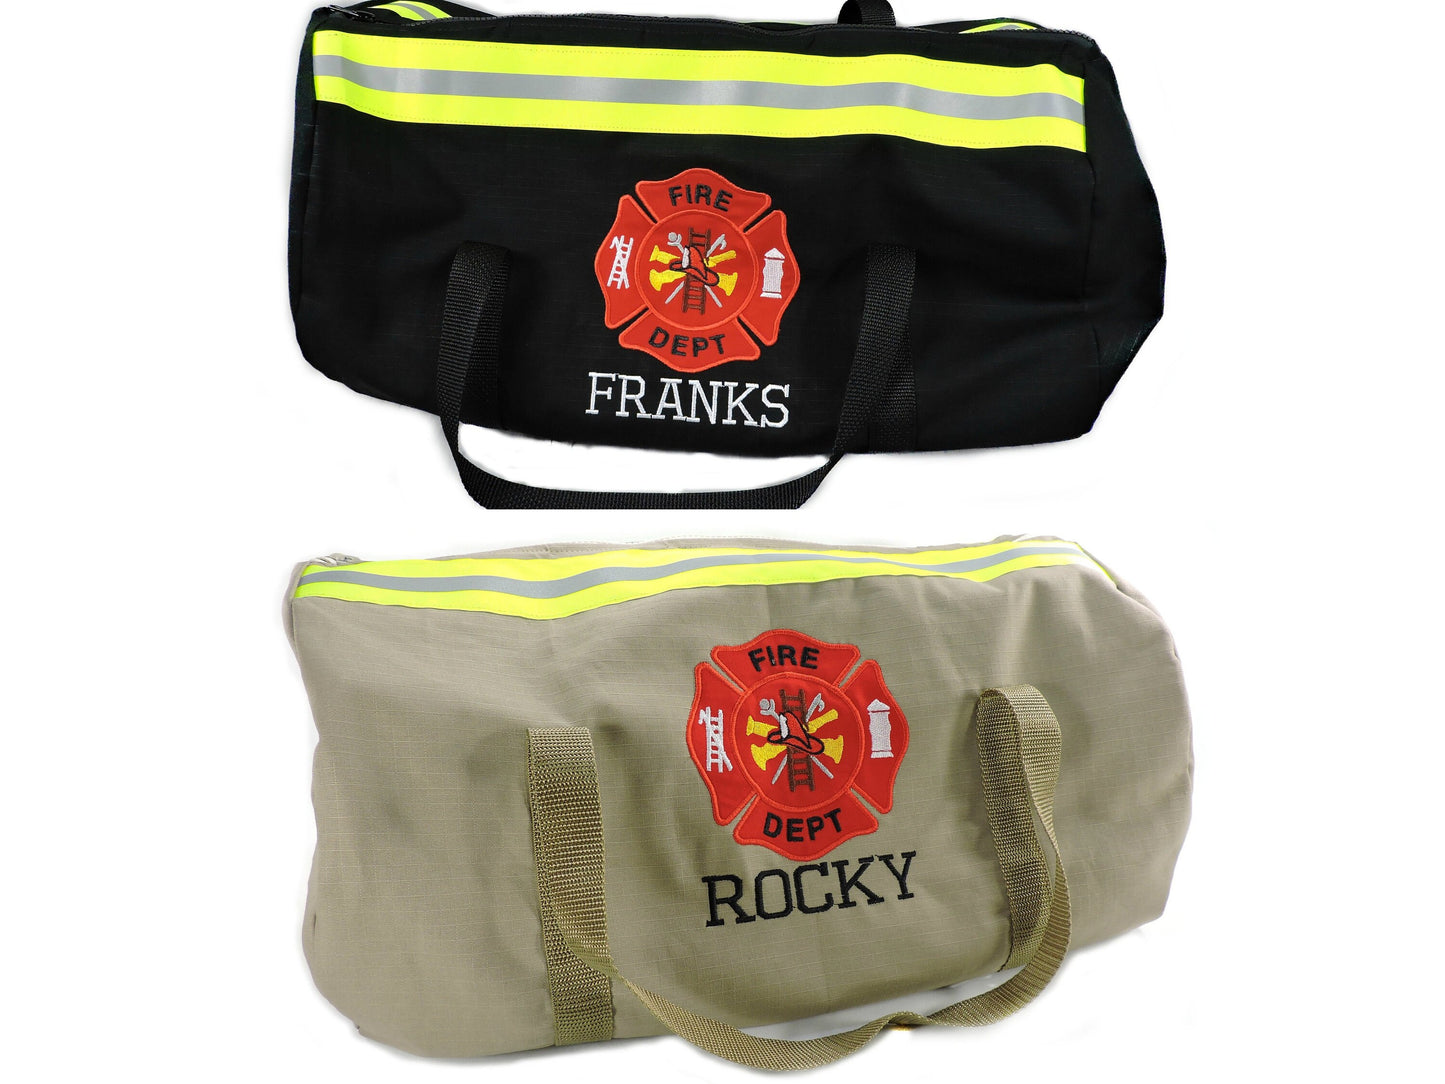 firefighter duffle bags with neon yellow tape